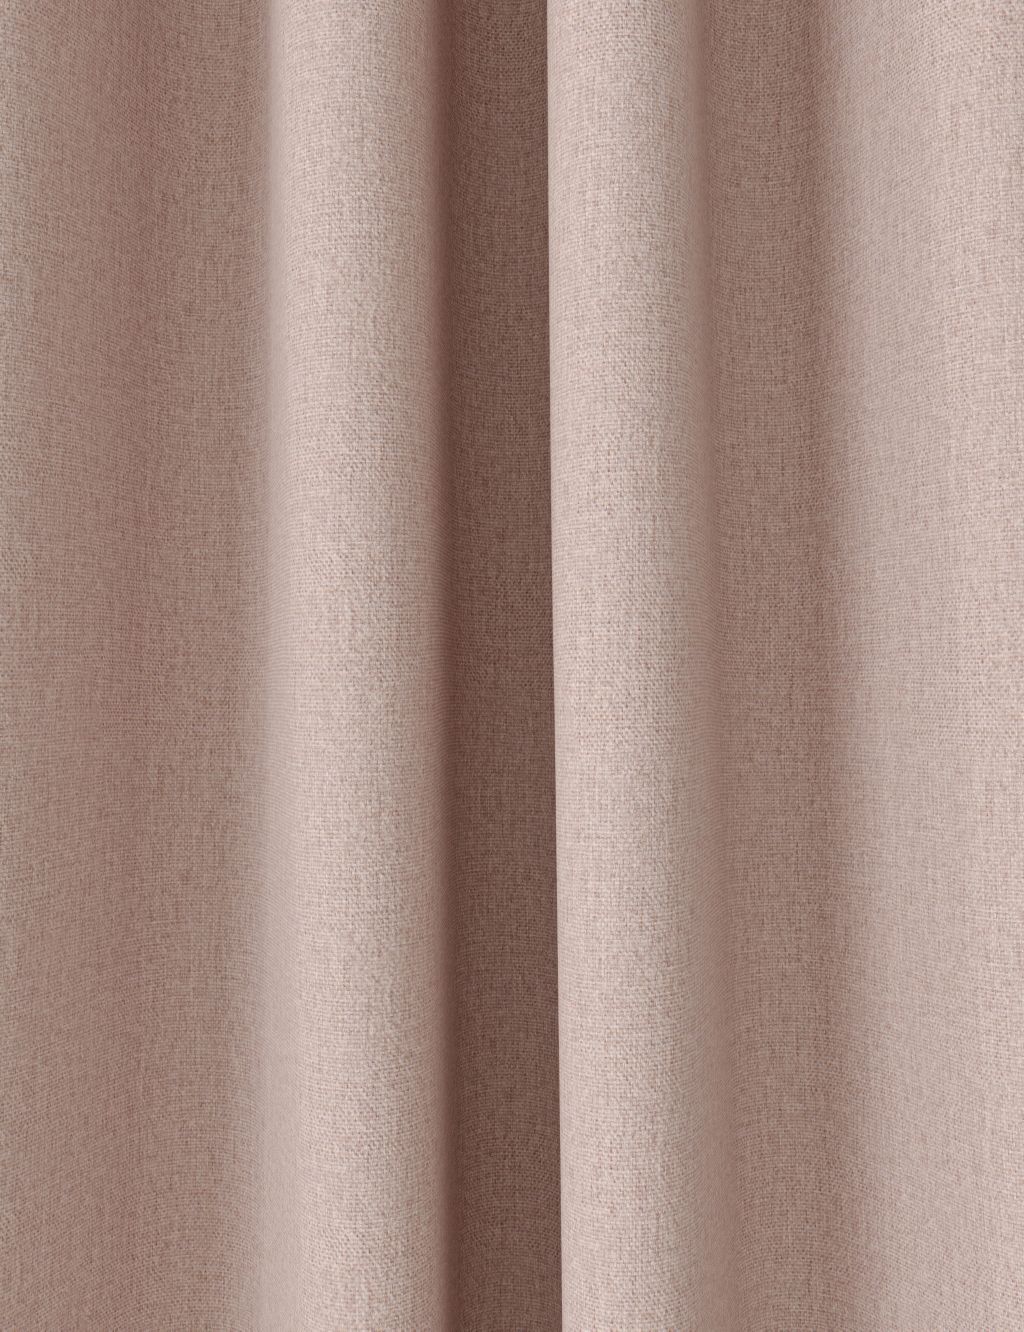 Eyelet Ultra Temperature Smart Blackout Curtains 3 of 6